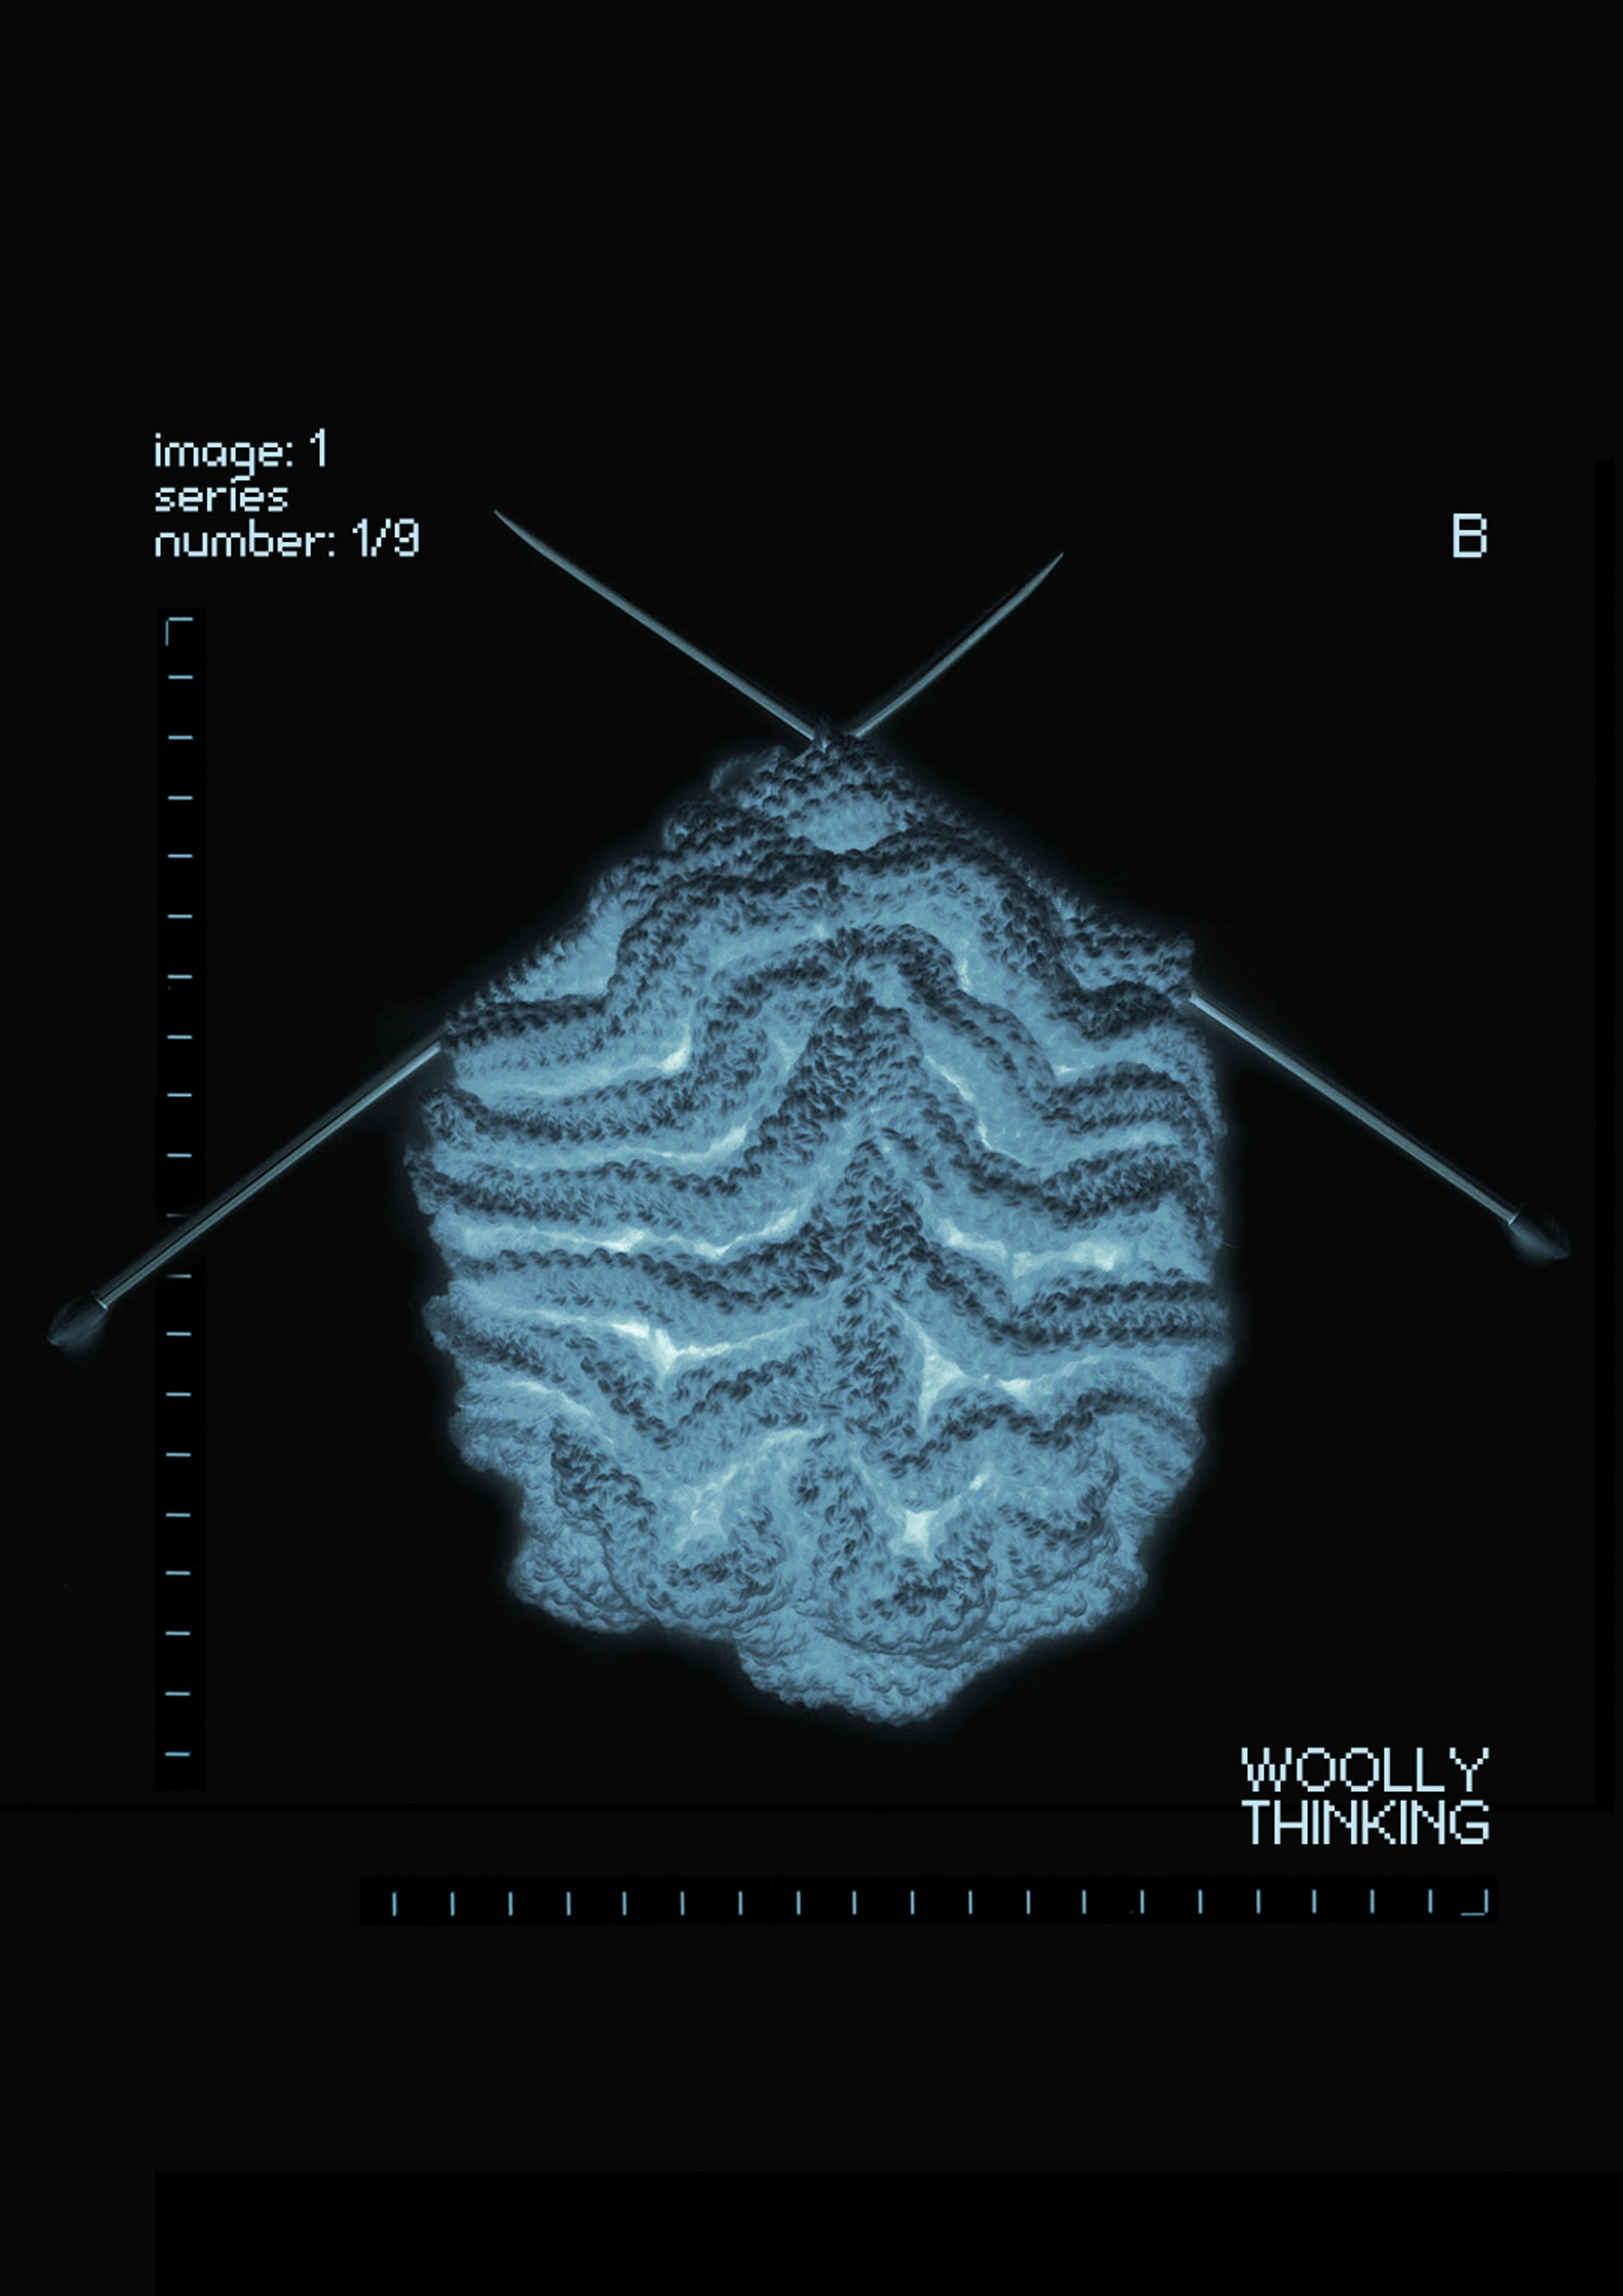 Woolly Thinking, artwork of the brain